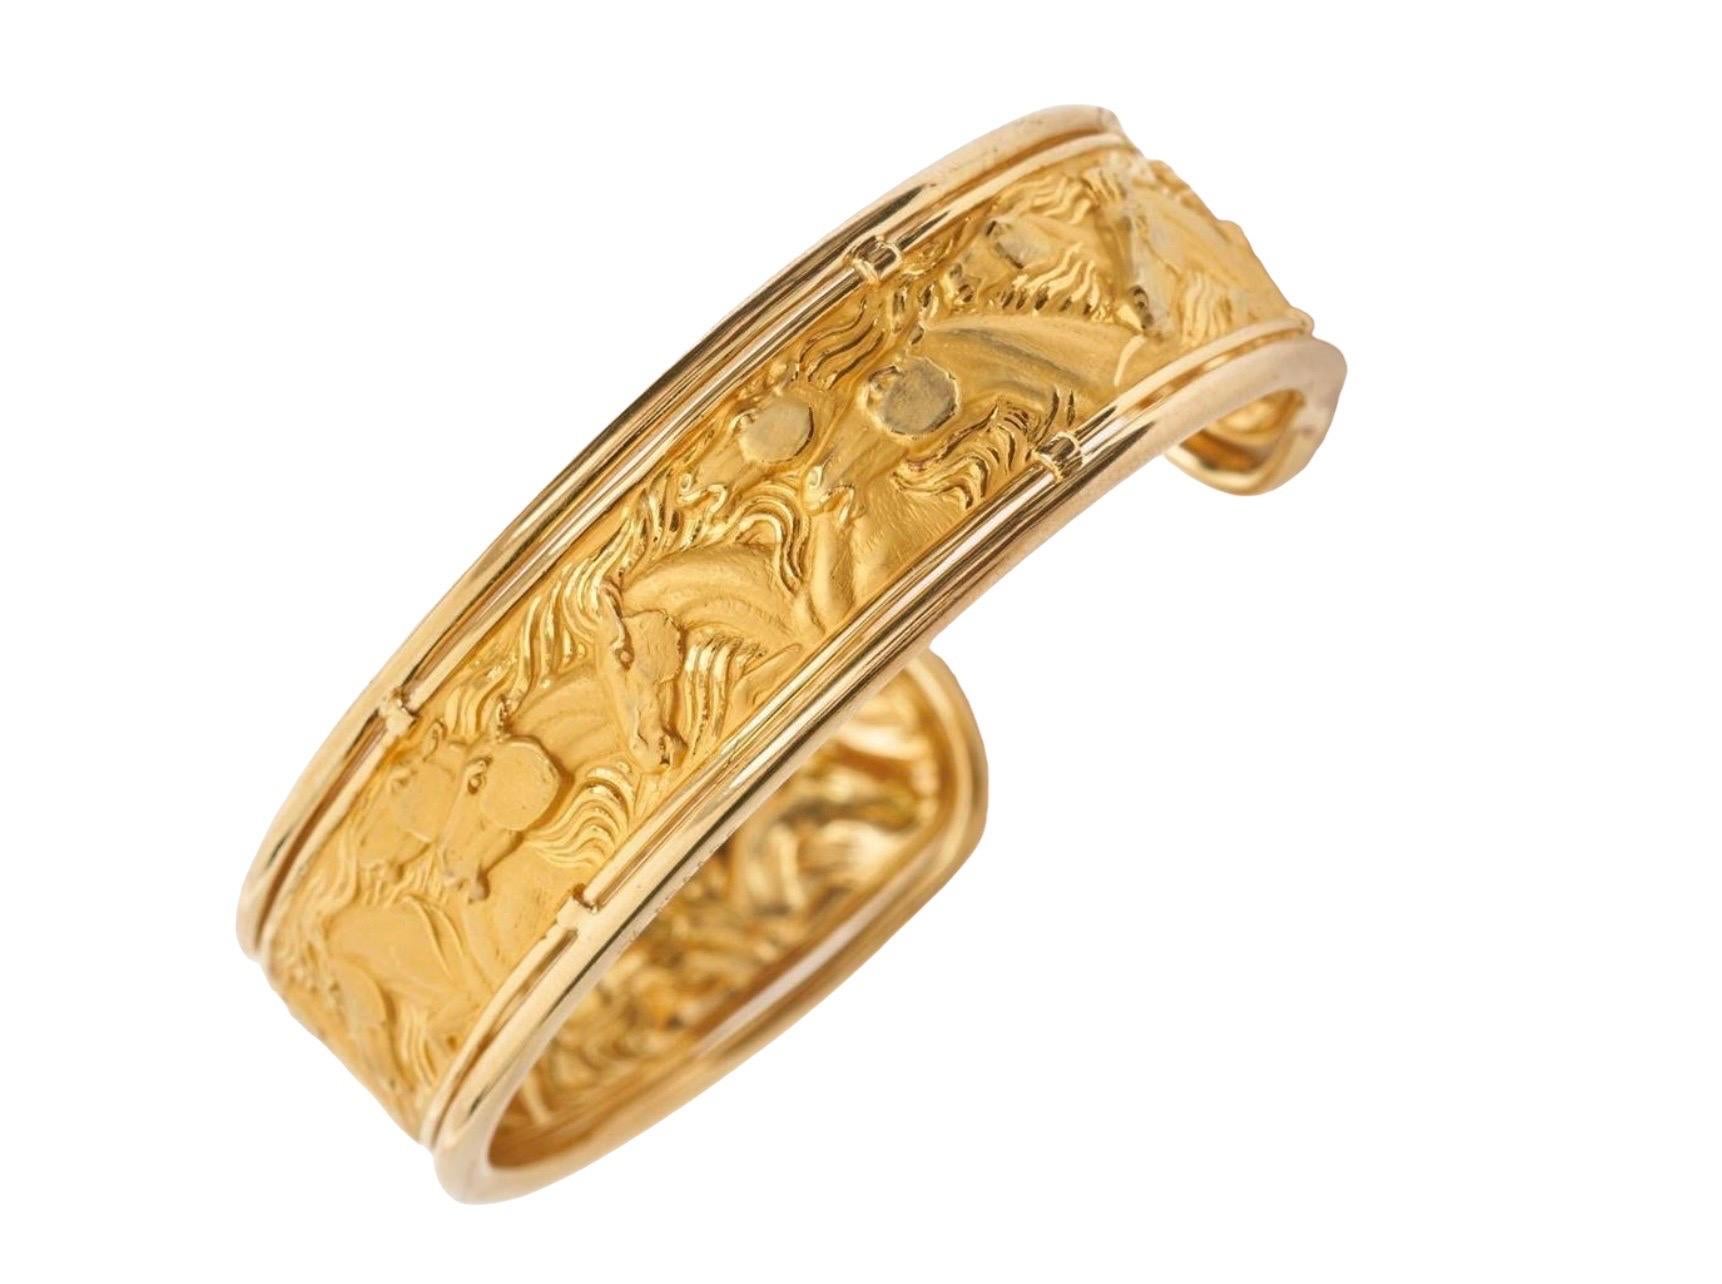 A sculptural and poetic 18k yellow gold equestrian themed cuff bracelet by Carrera y Carrera, Spain, circa 2000.
The narrow cuff bracelet with a central motif of a herd of running horses, manes streaming behind them. The horses wonderfully expressed